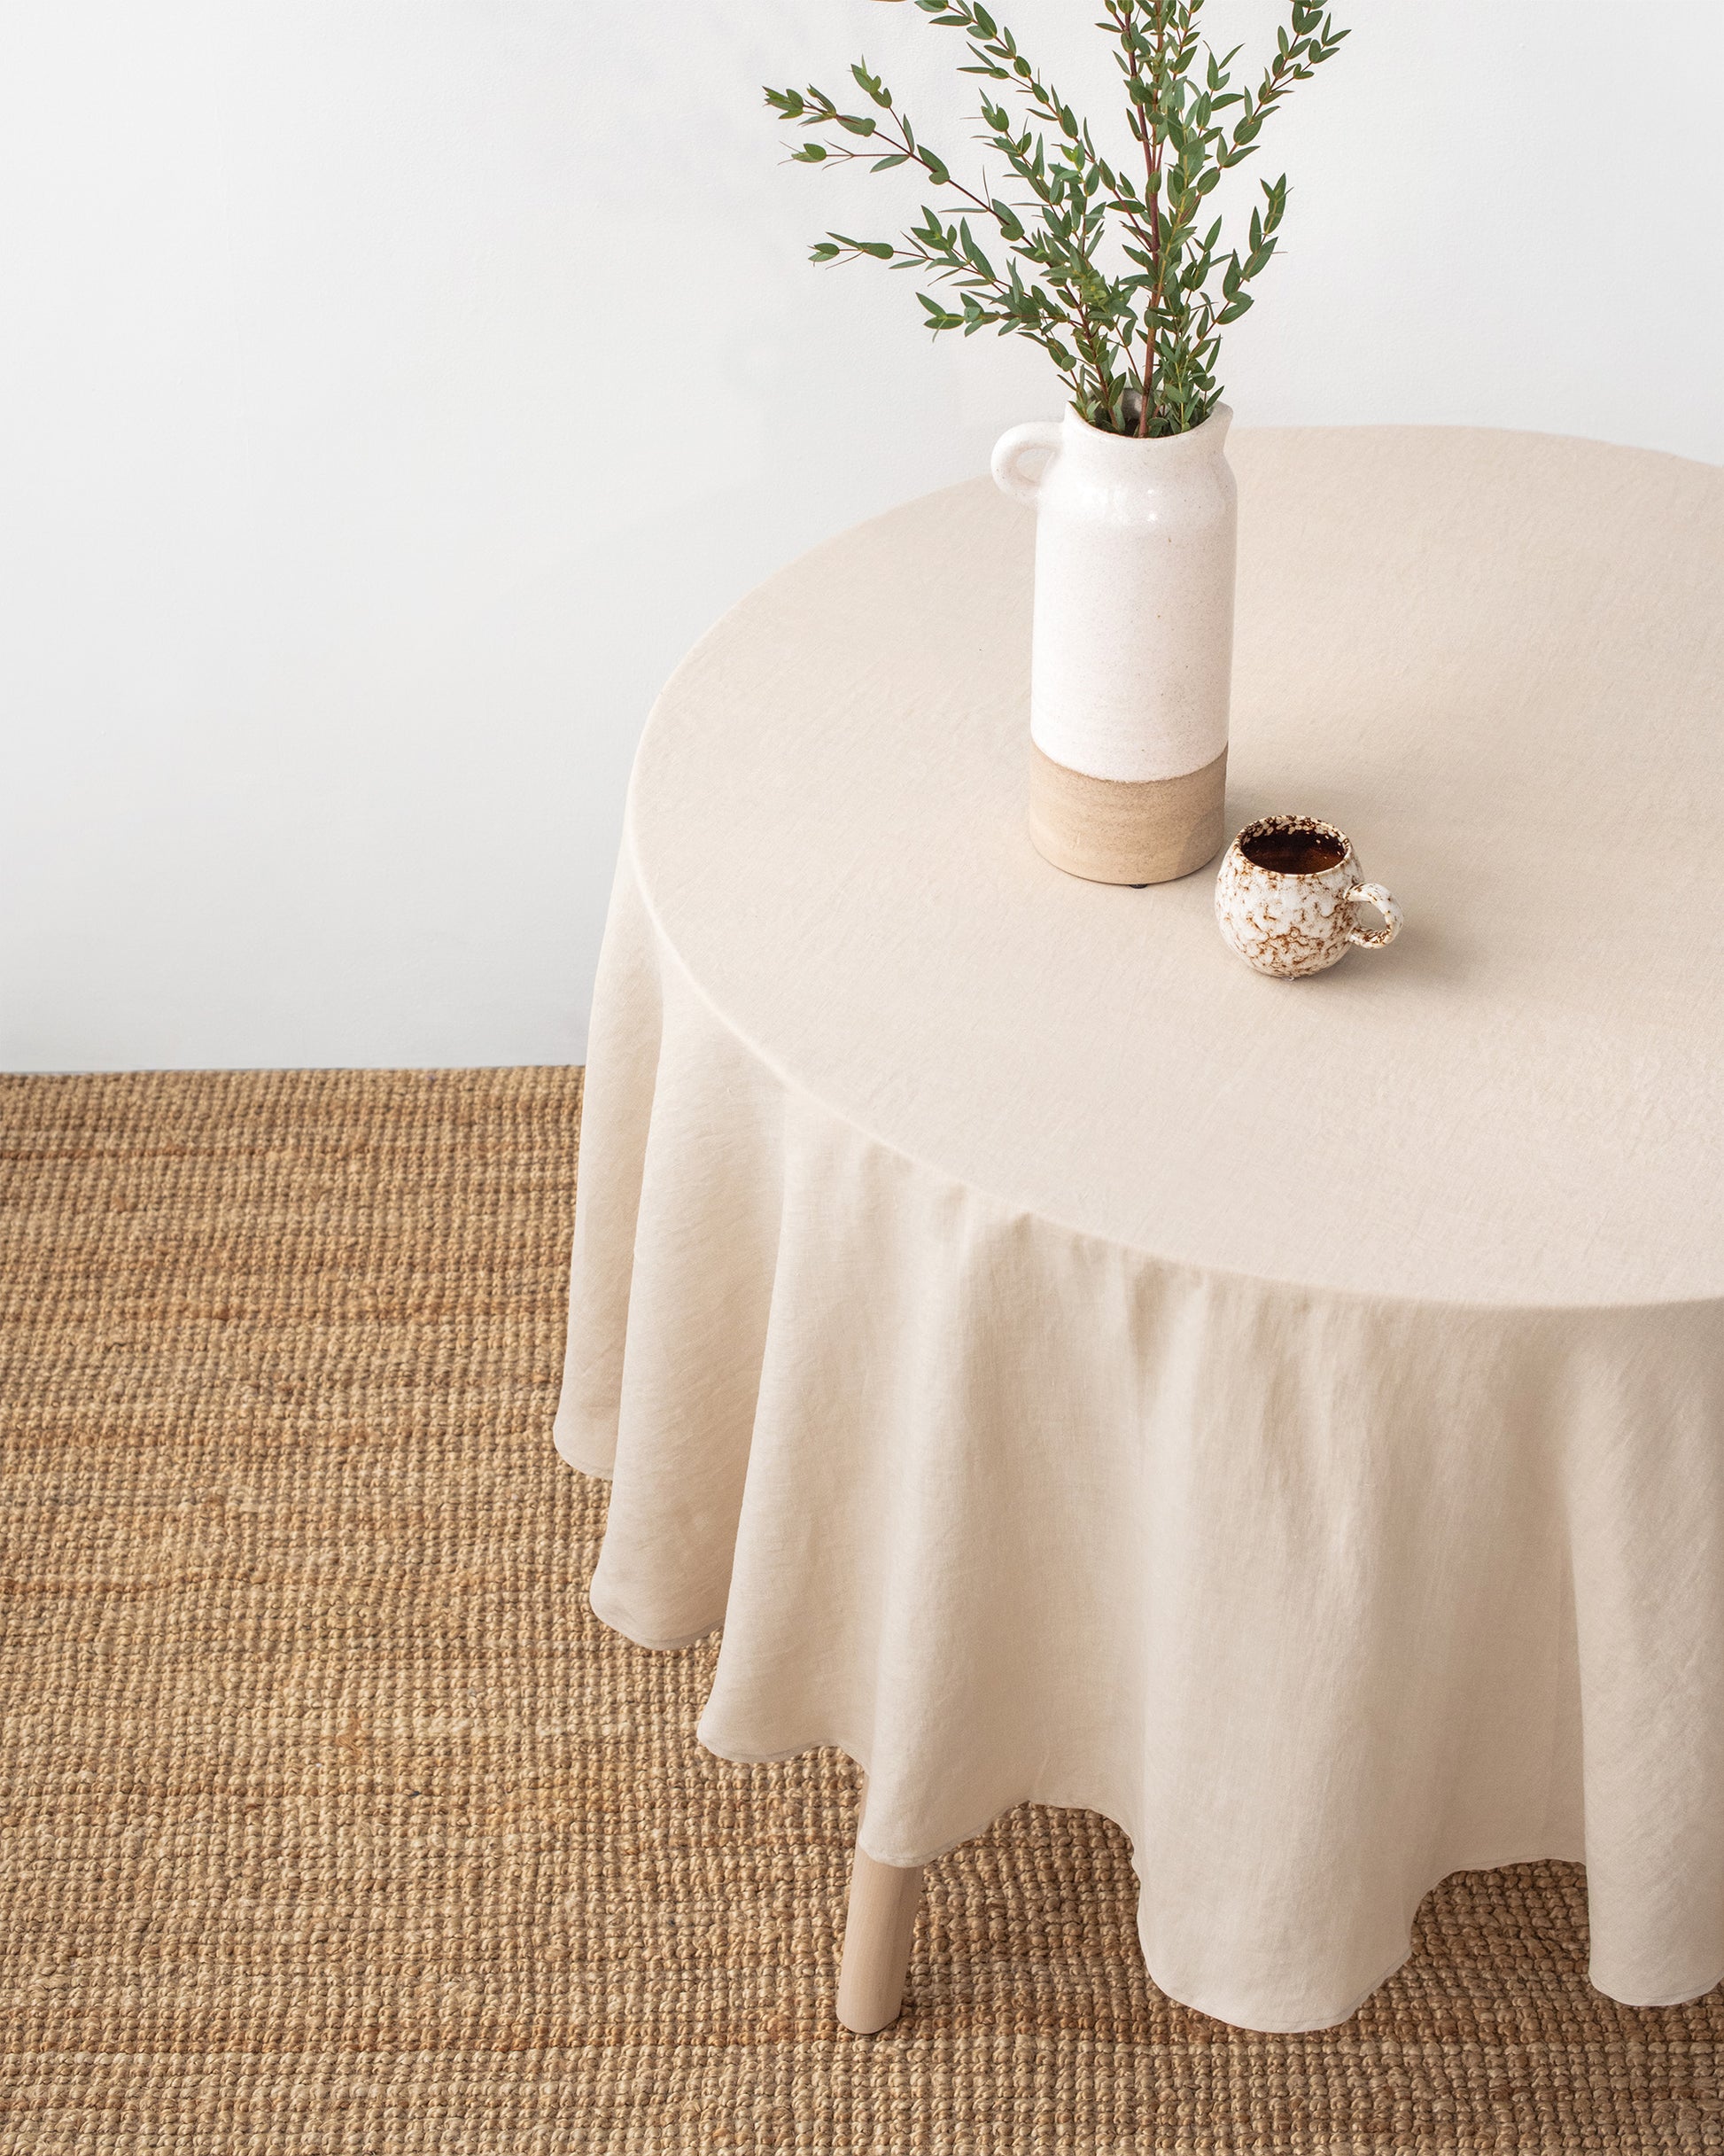 Natural Linen Napkins for Holiday, Christmas Dining Table. Cloth